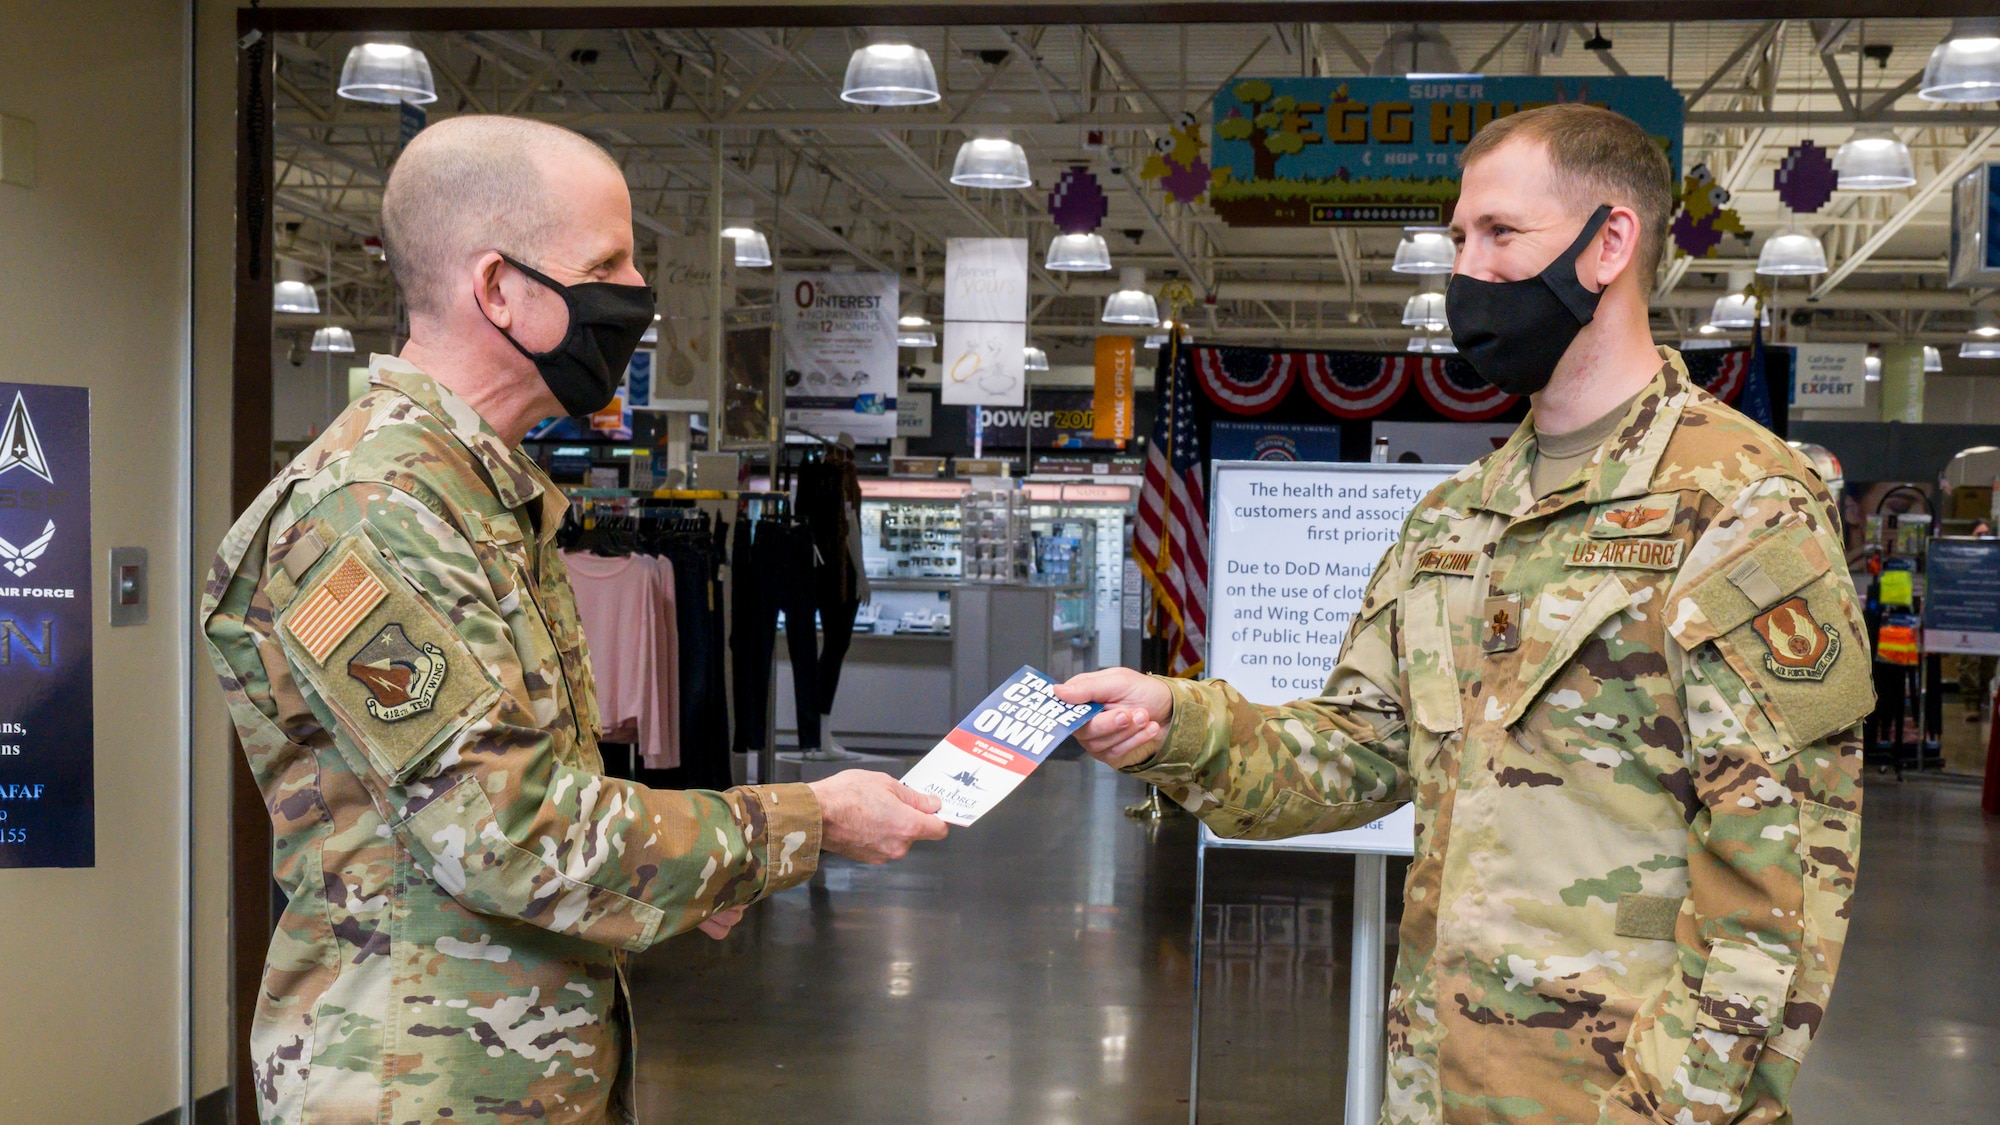 Brig. Gen. Matthew Higer, 412th Test Wing Commander, hands an Air Force Assistance Fund pamphlet to Maj. Peter Zevetchin, Air Force Materiel Command, at Edwards Air Force Base, California, March 22. (Air Force photo by Giancarlo Casem)